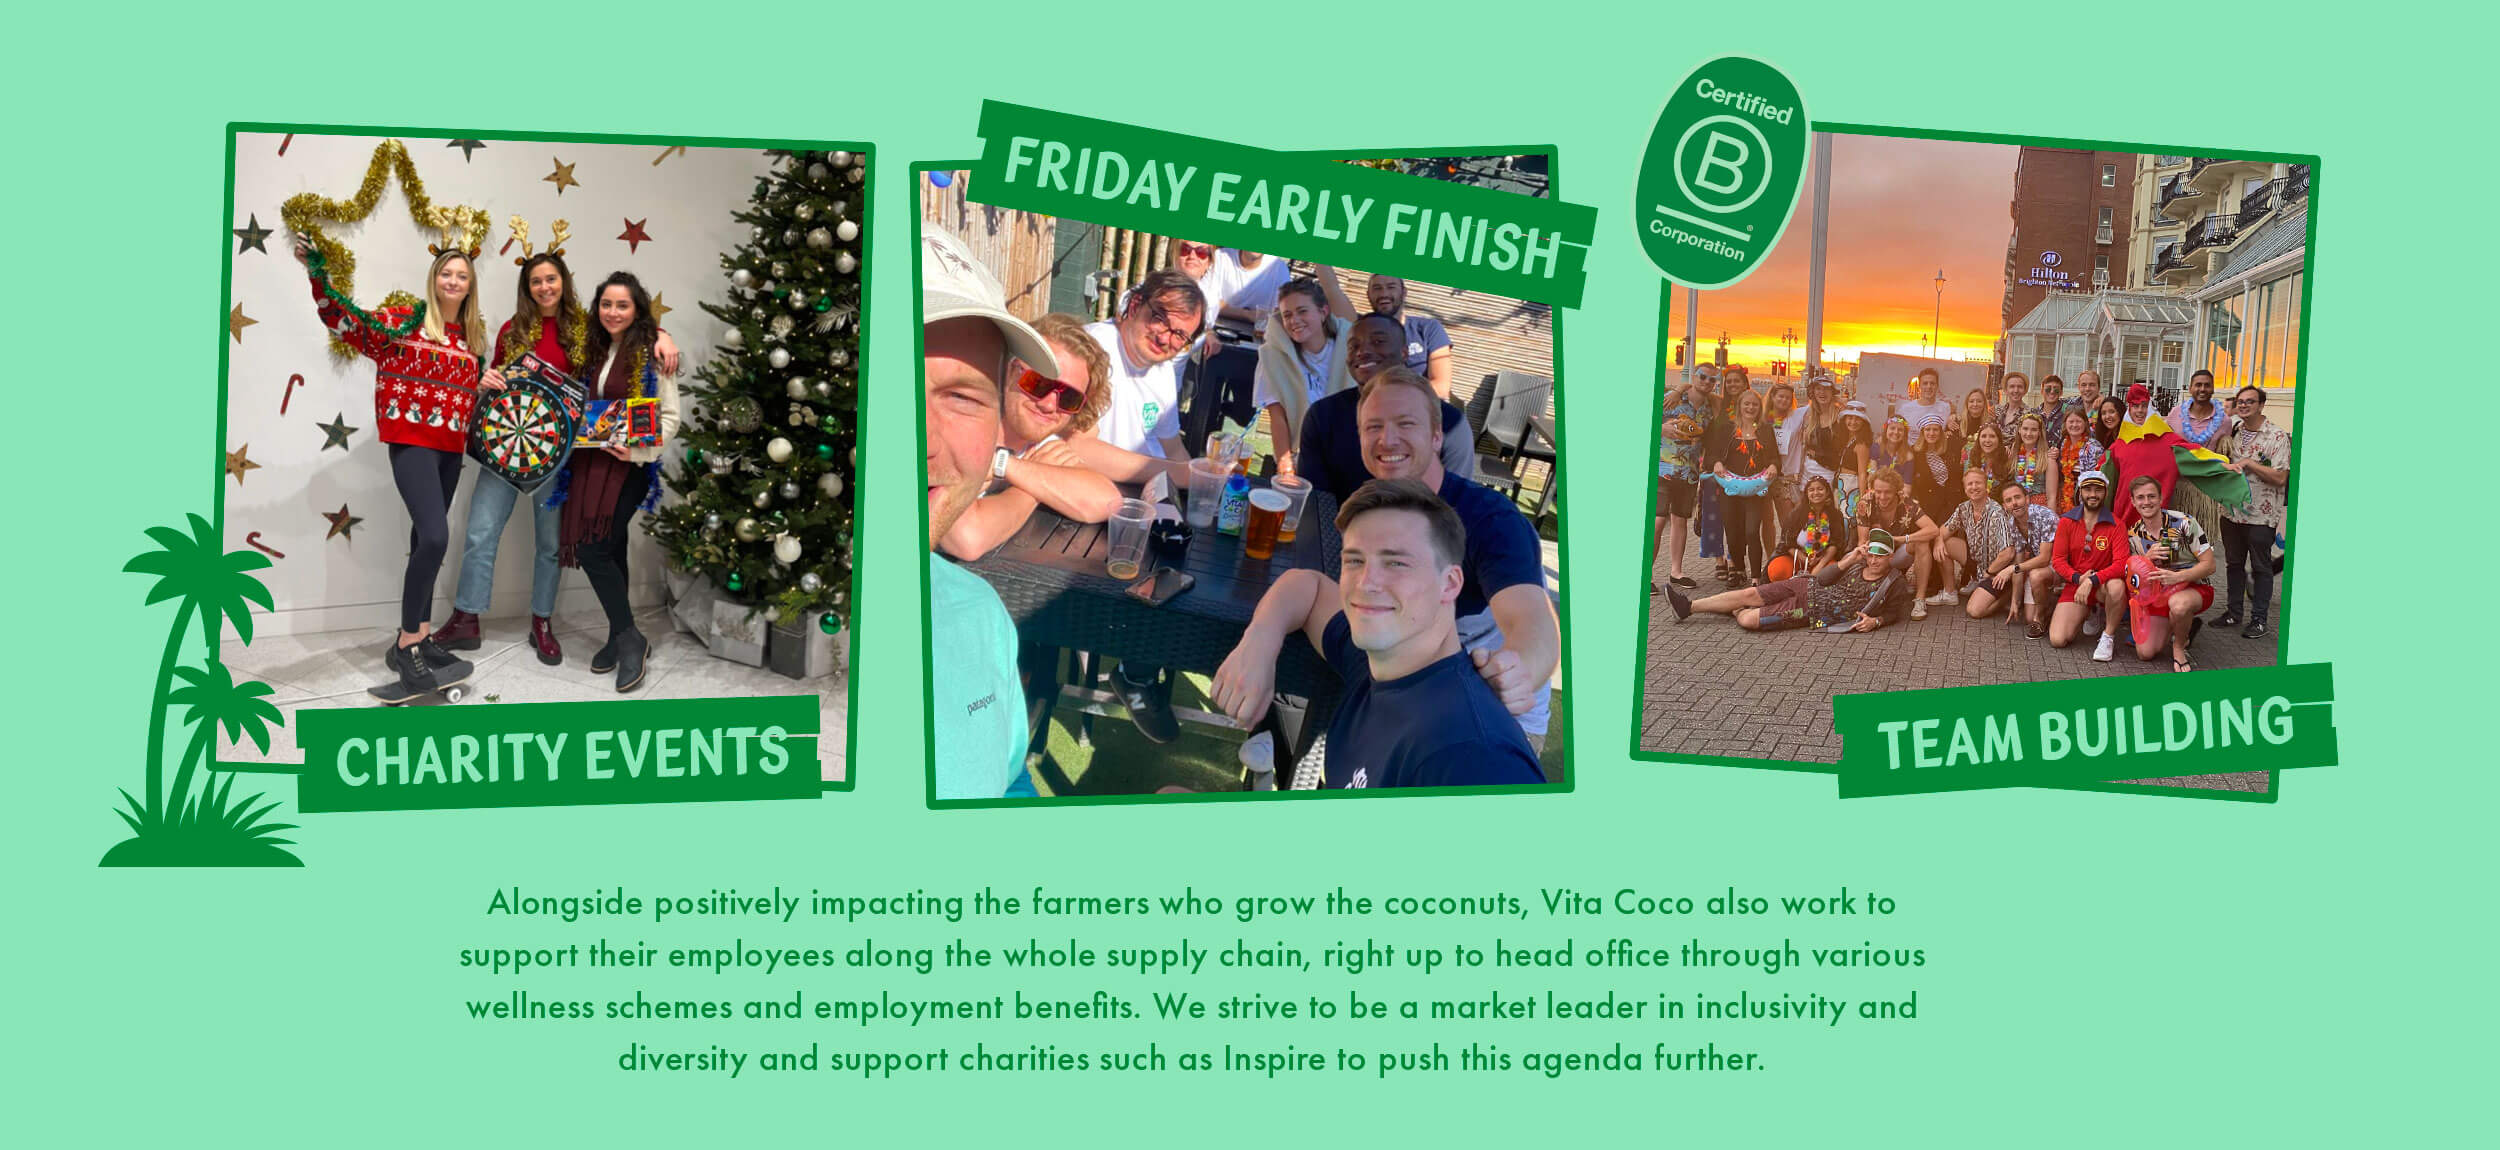 At the Vita Coco Headquarter we do: charity events, Friday early finish and team building. Alongside positively impacting the farmers who grow the coconuts, Vita Coco also work to support their employees along the whole supply chain, right up to head office through various wellness schemes and employment benefits. We strive to be a market leader in inclusivity and diversity and support charities such as 